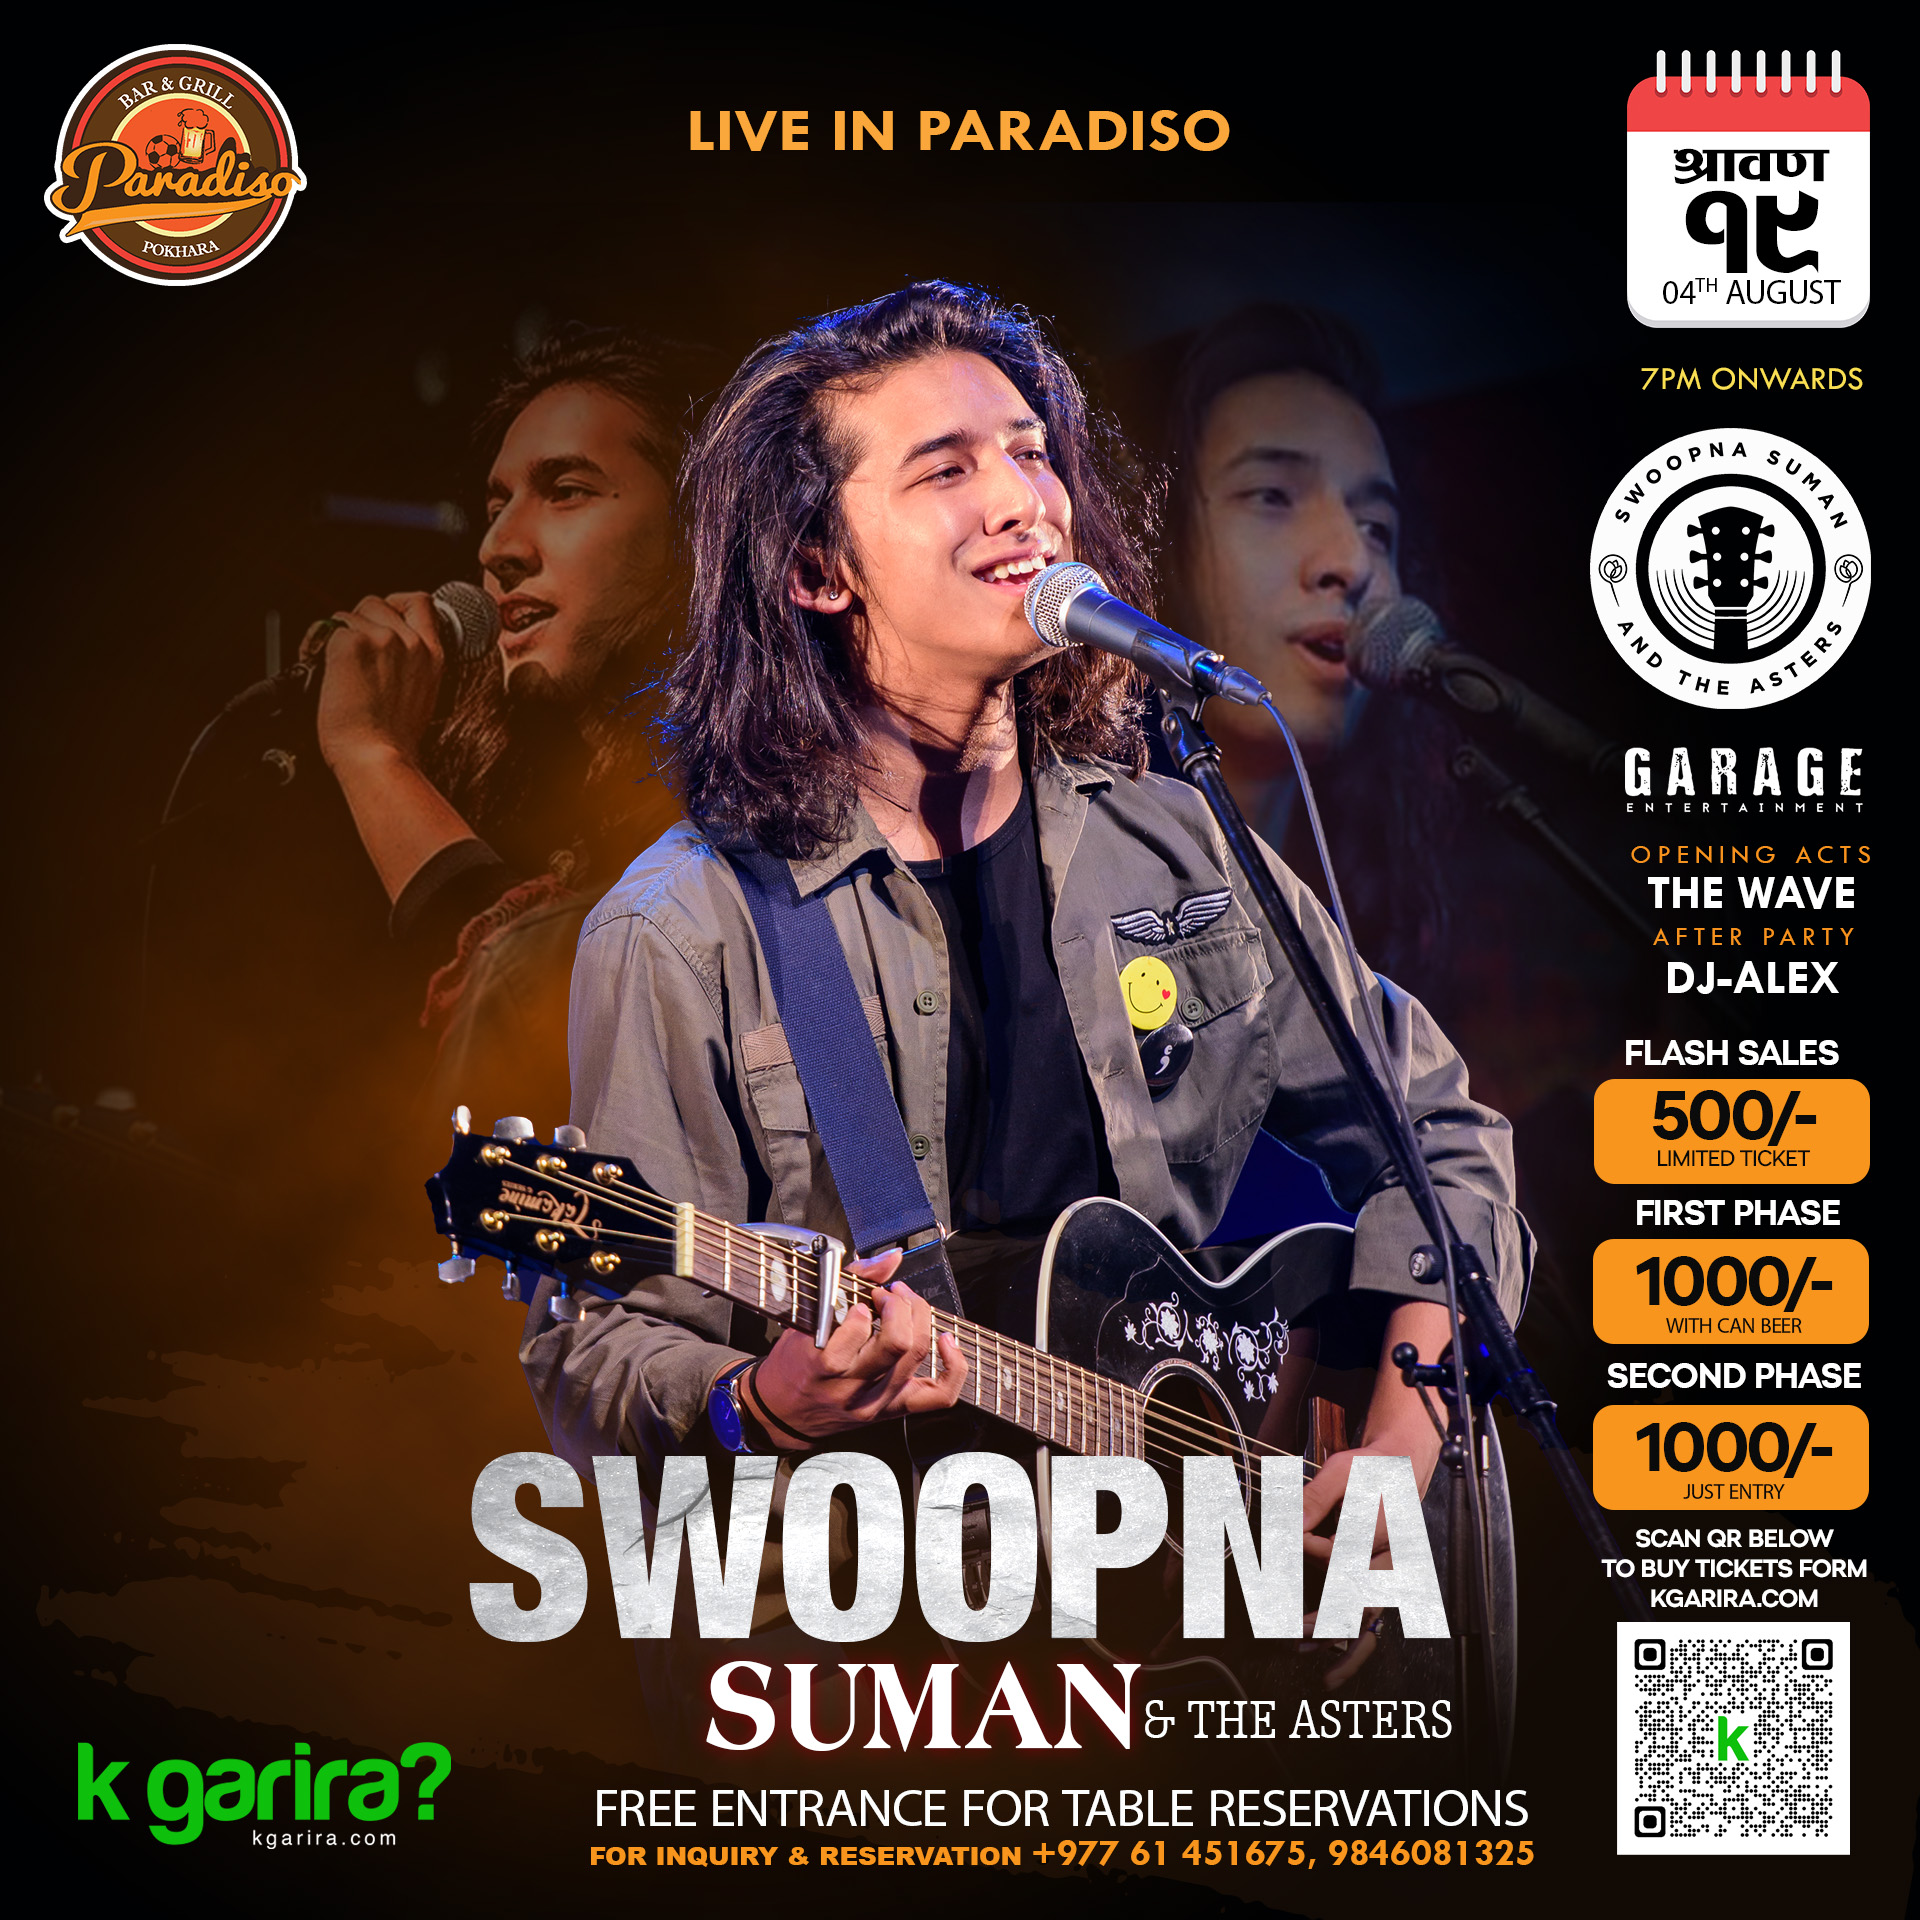 Swoopna Suman & The Asters LIVE in Paradiso Pokhara